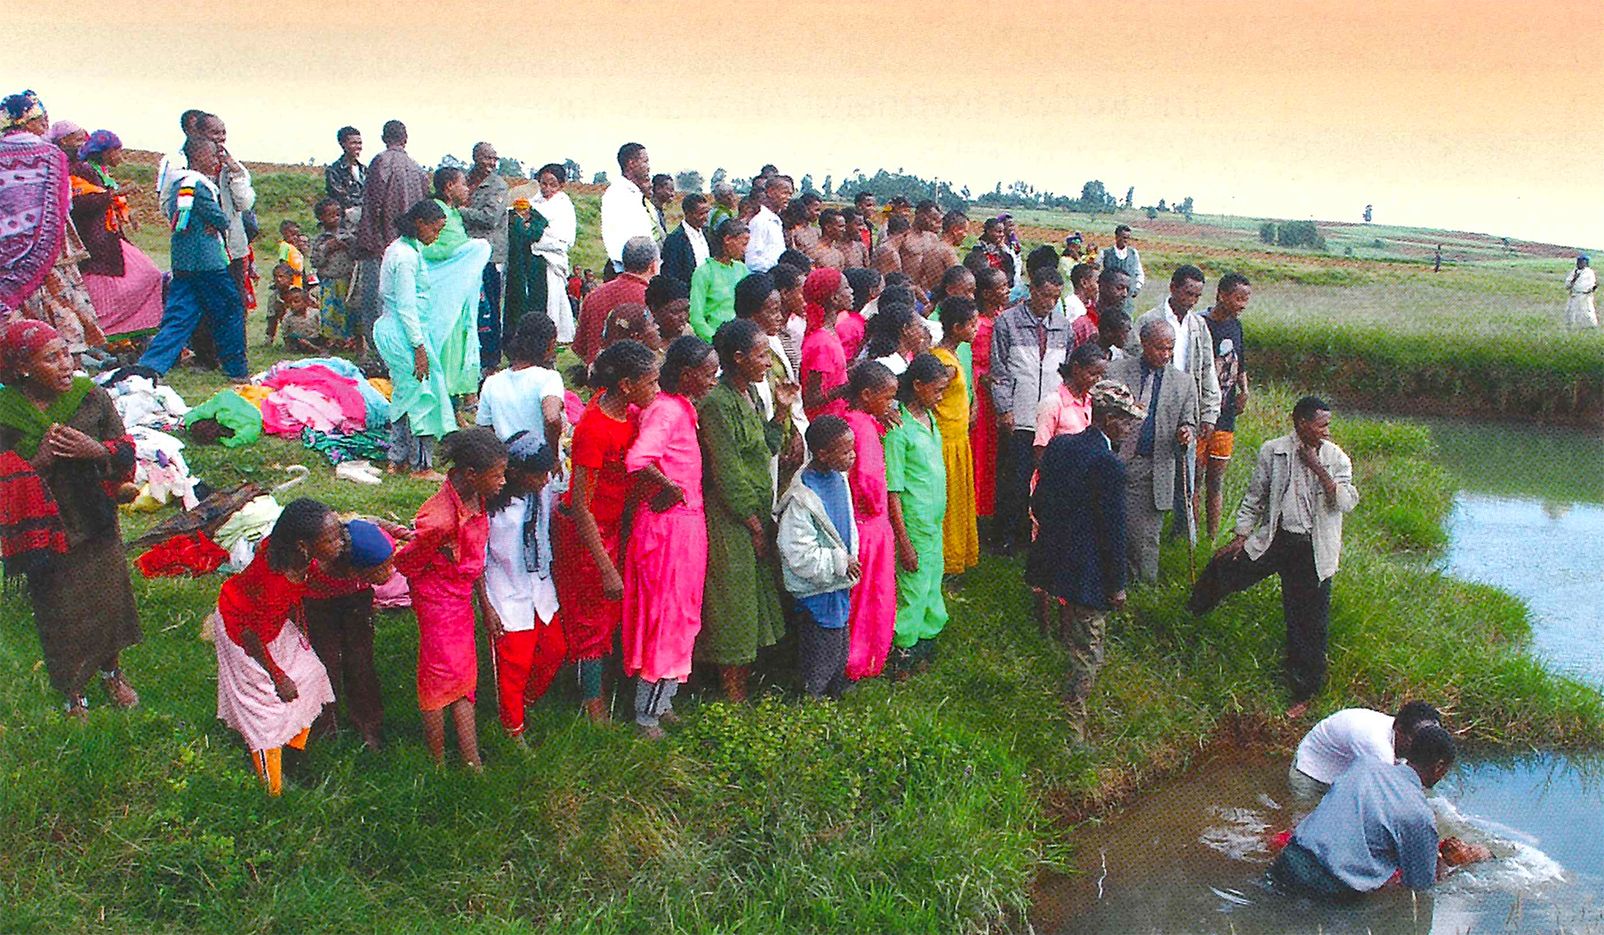 A baptism service among the Selale Oromo people in Ethiopia